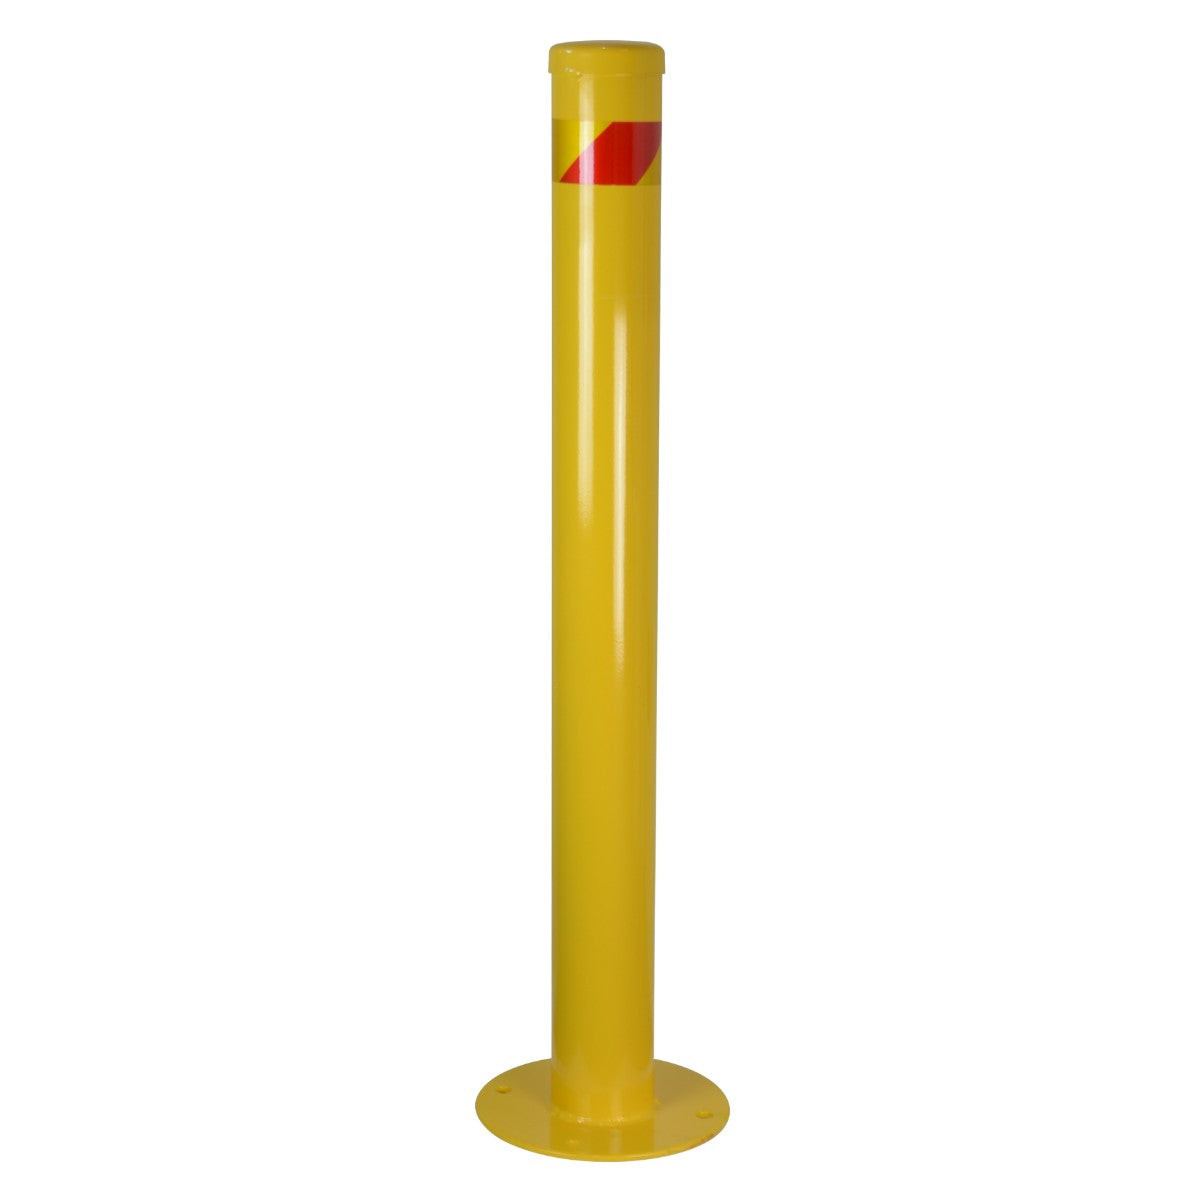 Maxisafe Yellow Steel Bollard with Reflective Red Stripe BSB792 (Each)